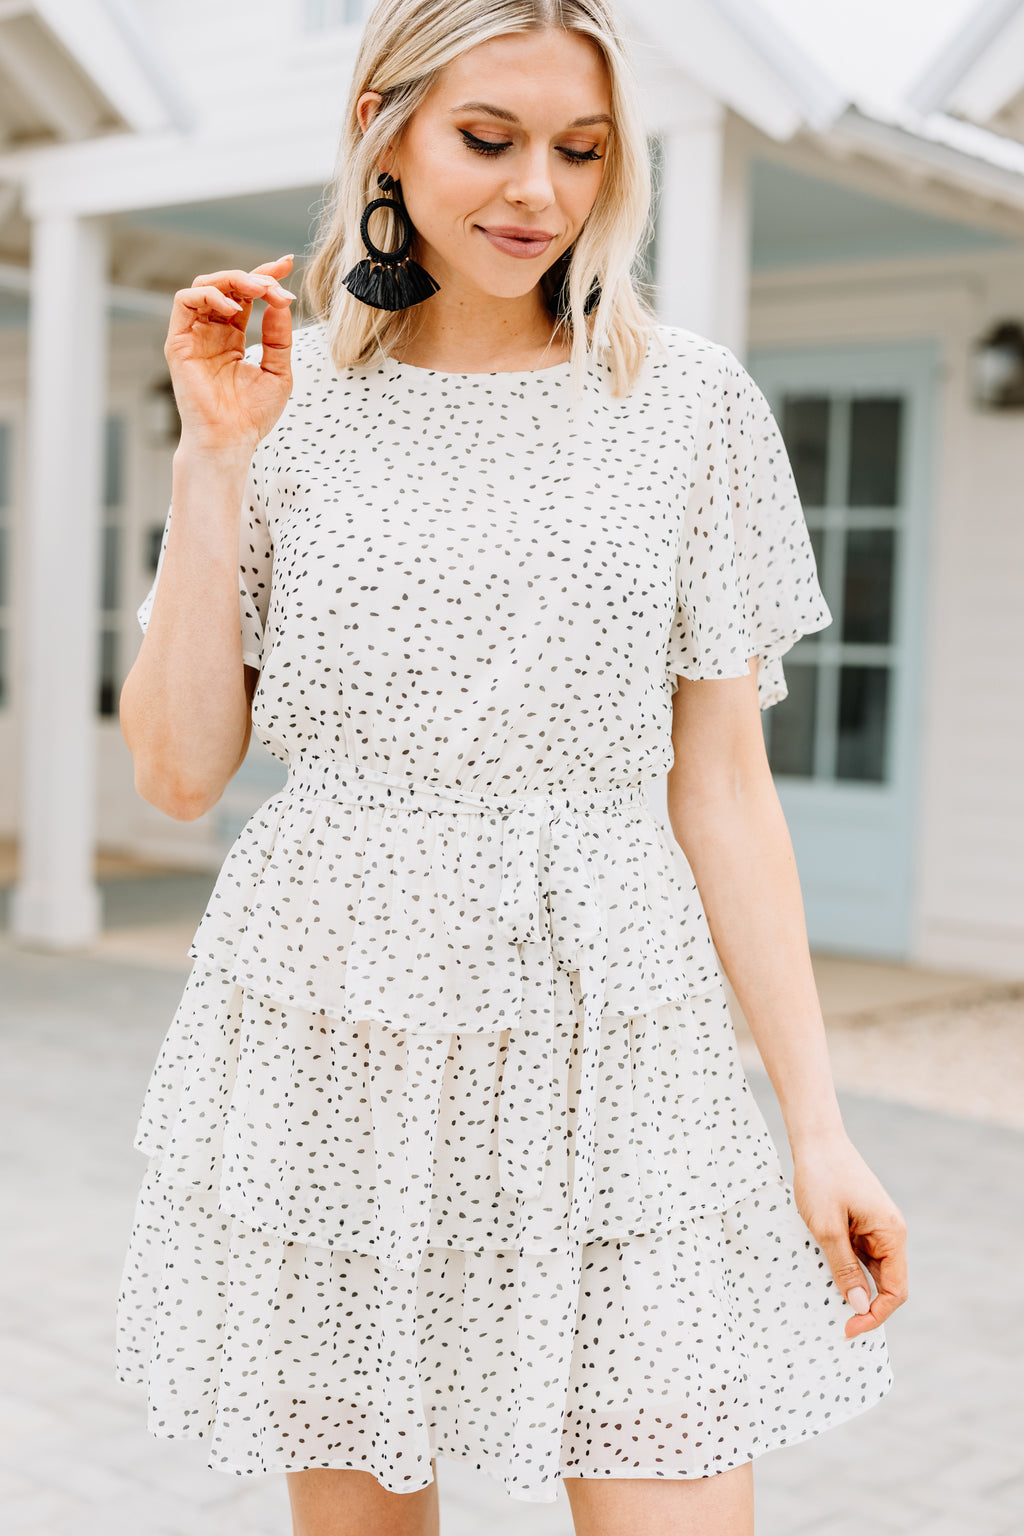 Take Your Word For It White Spotted Dress – Shop The Mint